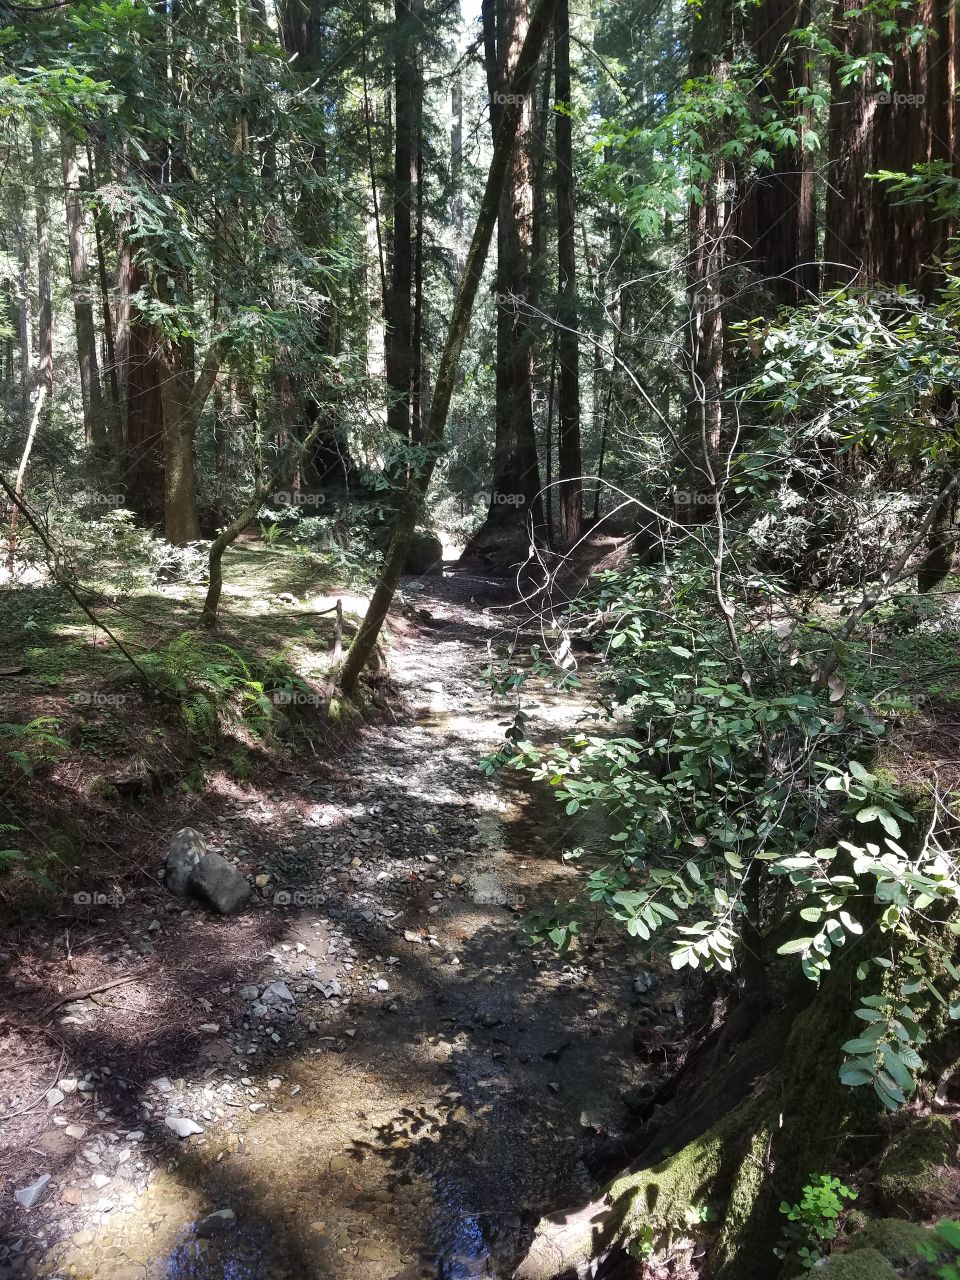 a quiet stream trickles through the giant redwood forest